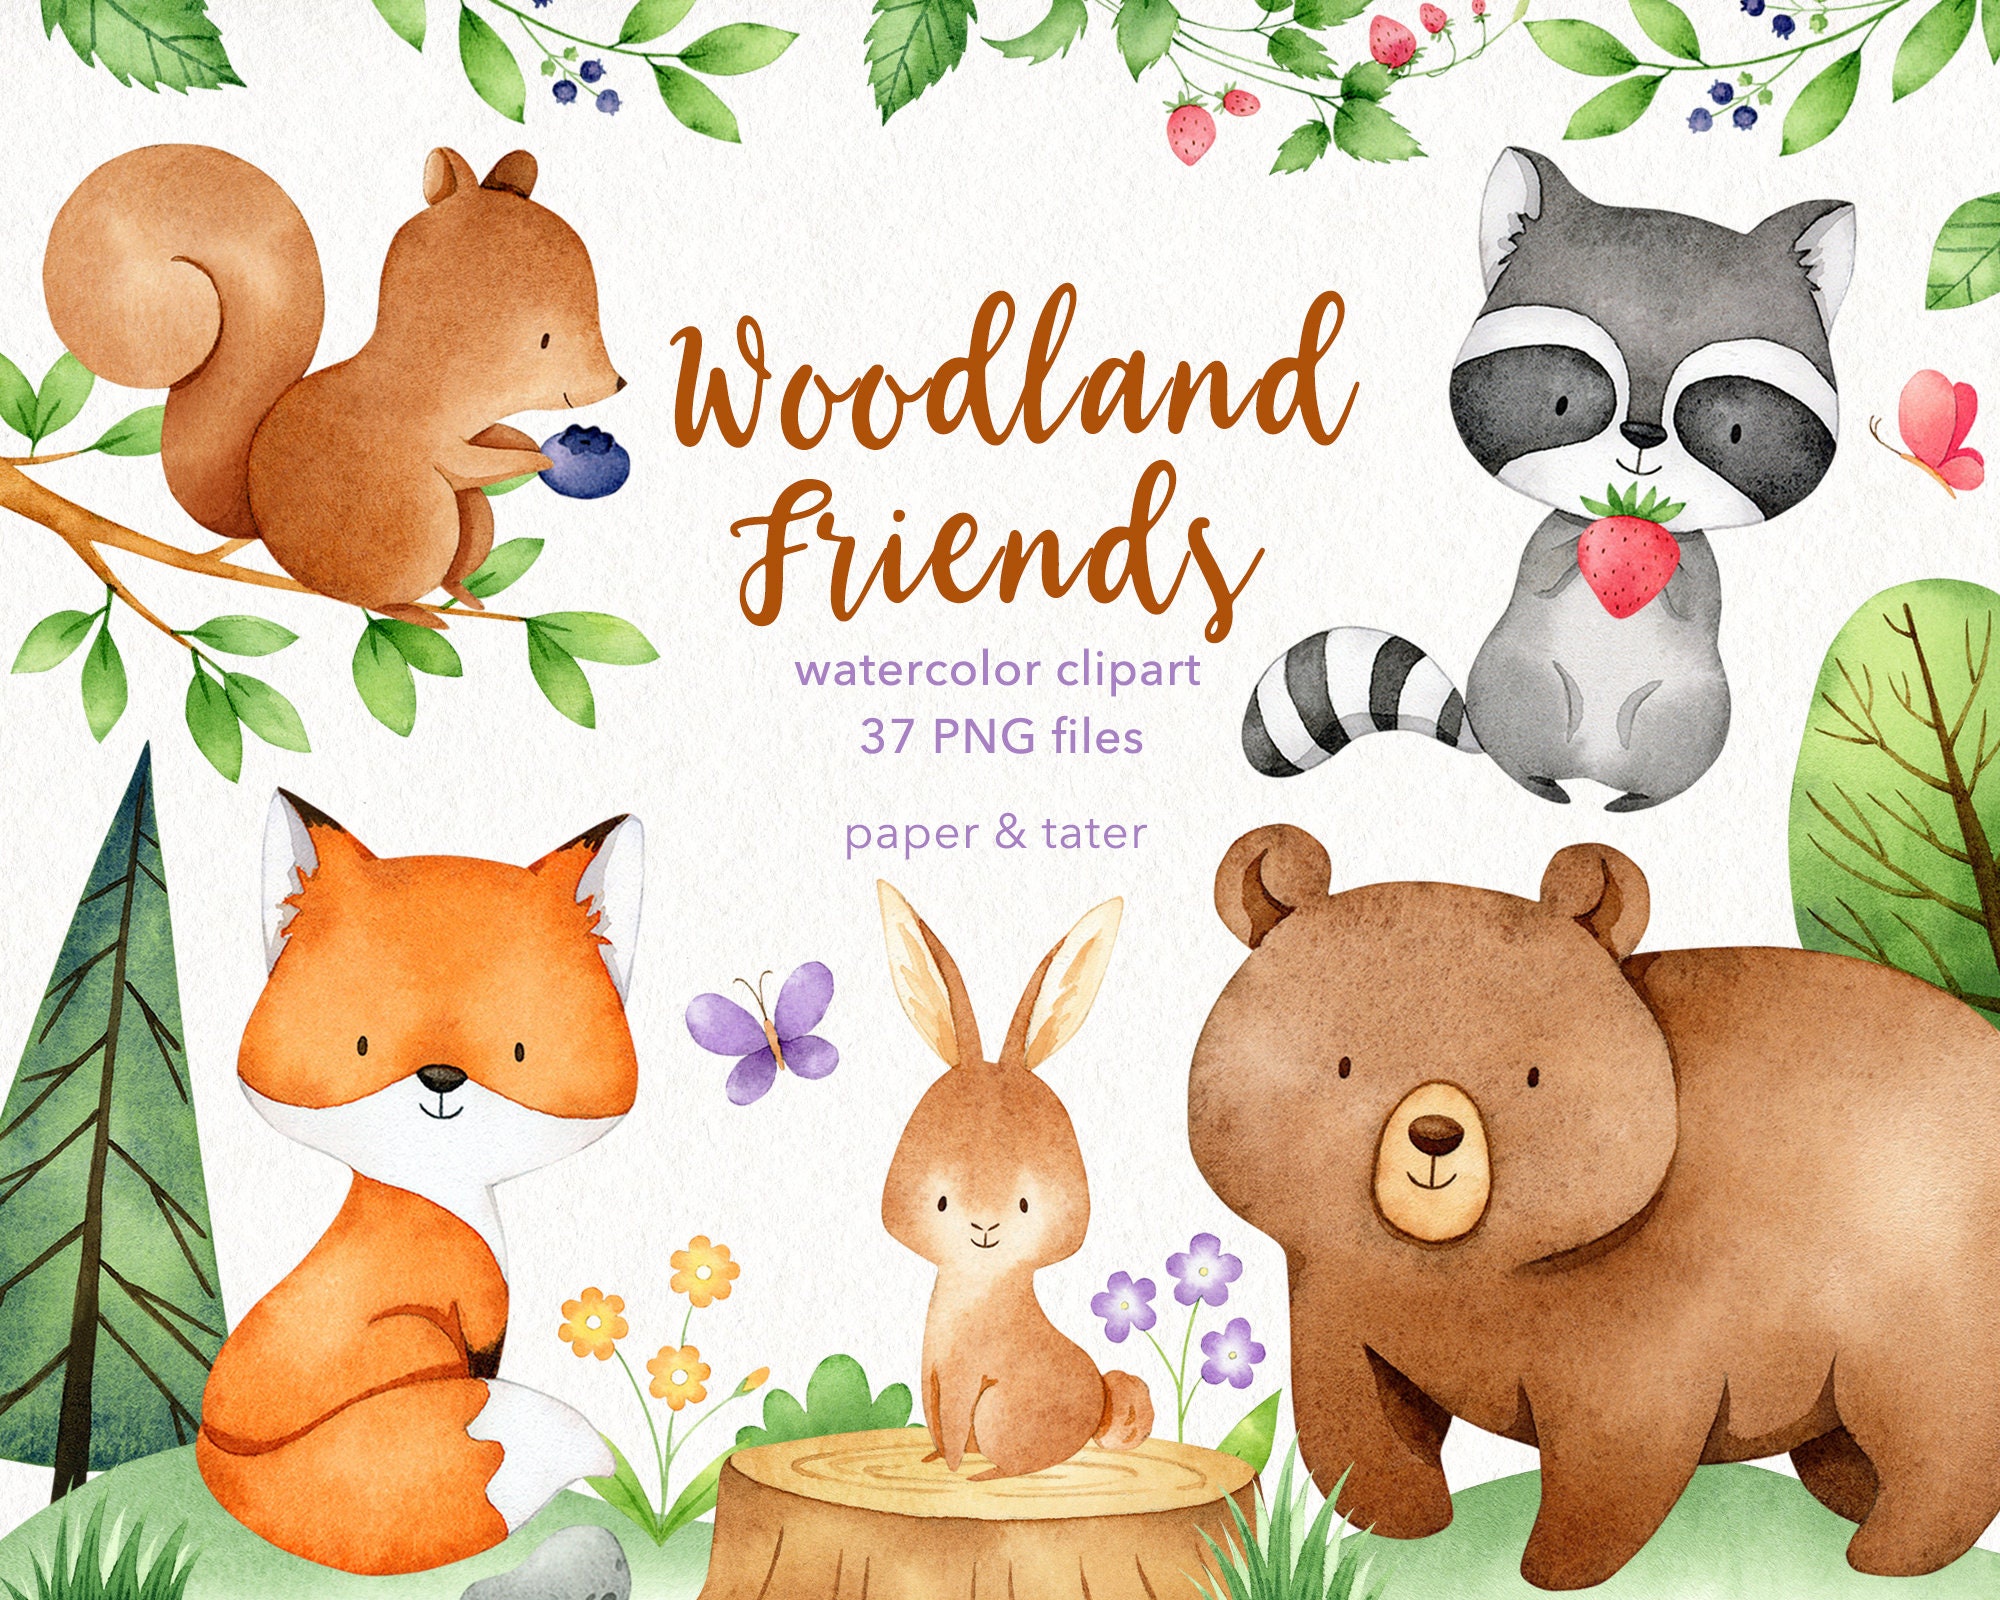 Bear clipart Forest friends clipart Fox clipart Watercolor forest friends graphic collection Raccoon clipart Watercolor animals clipart